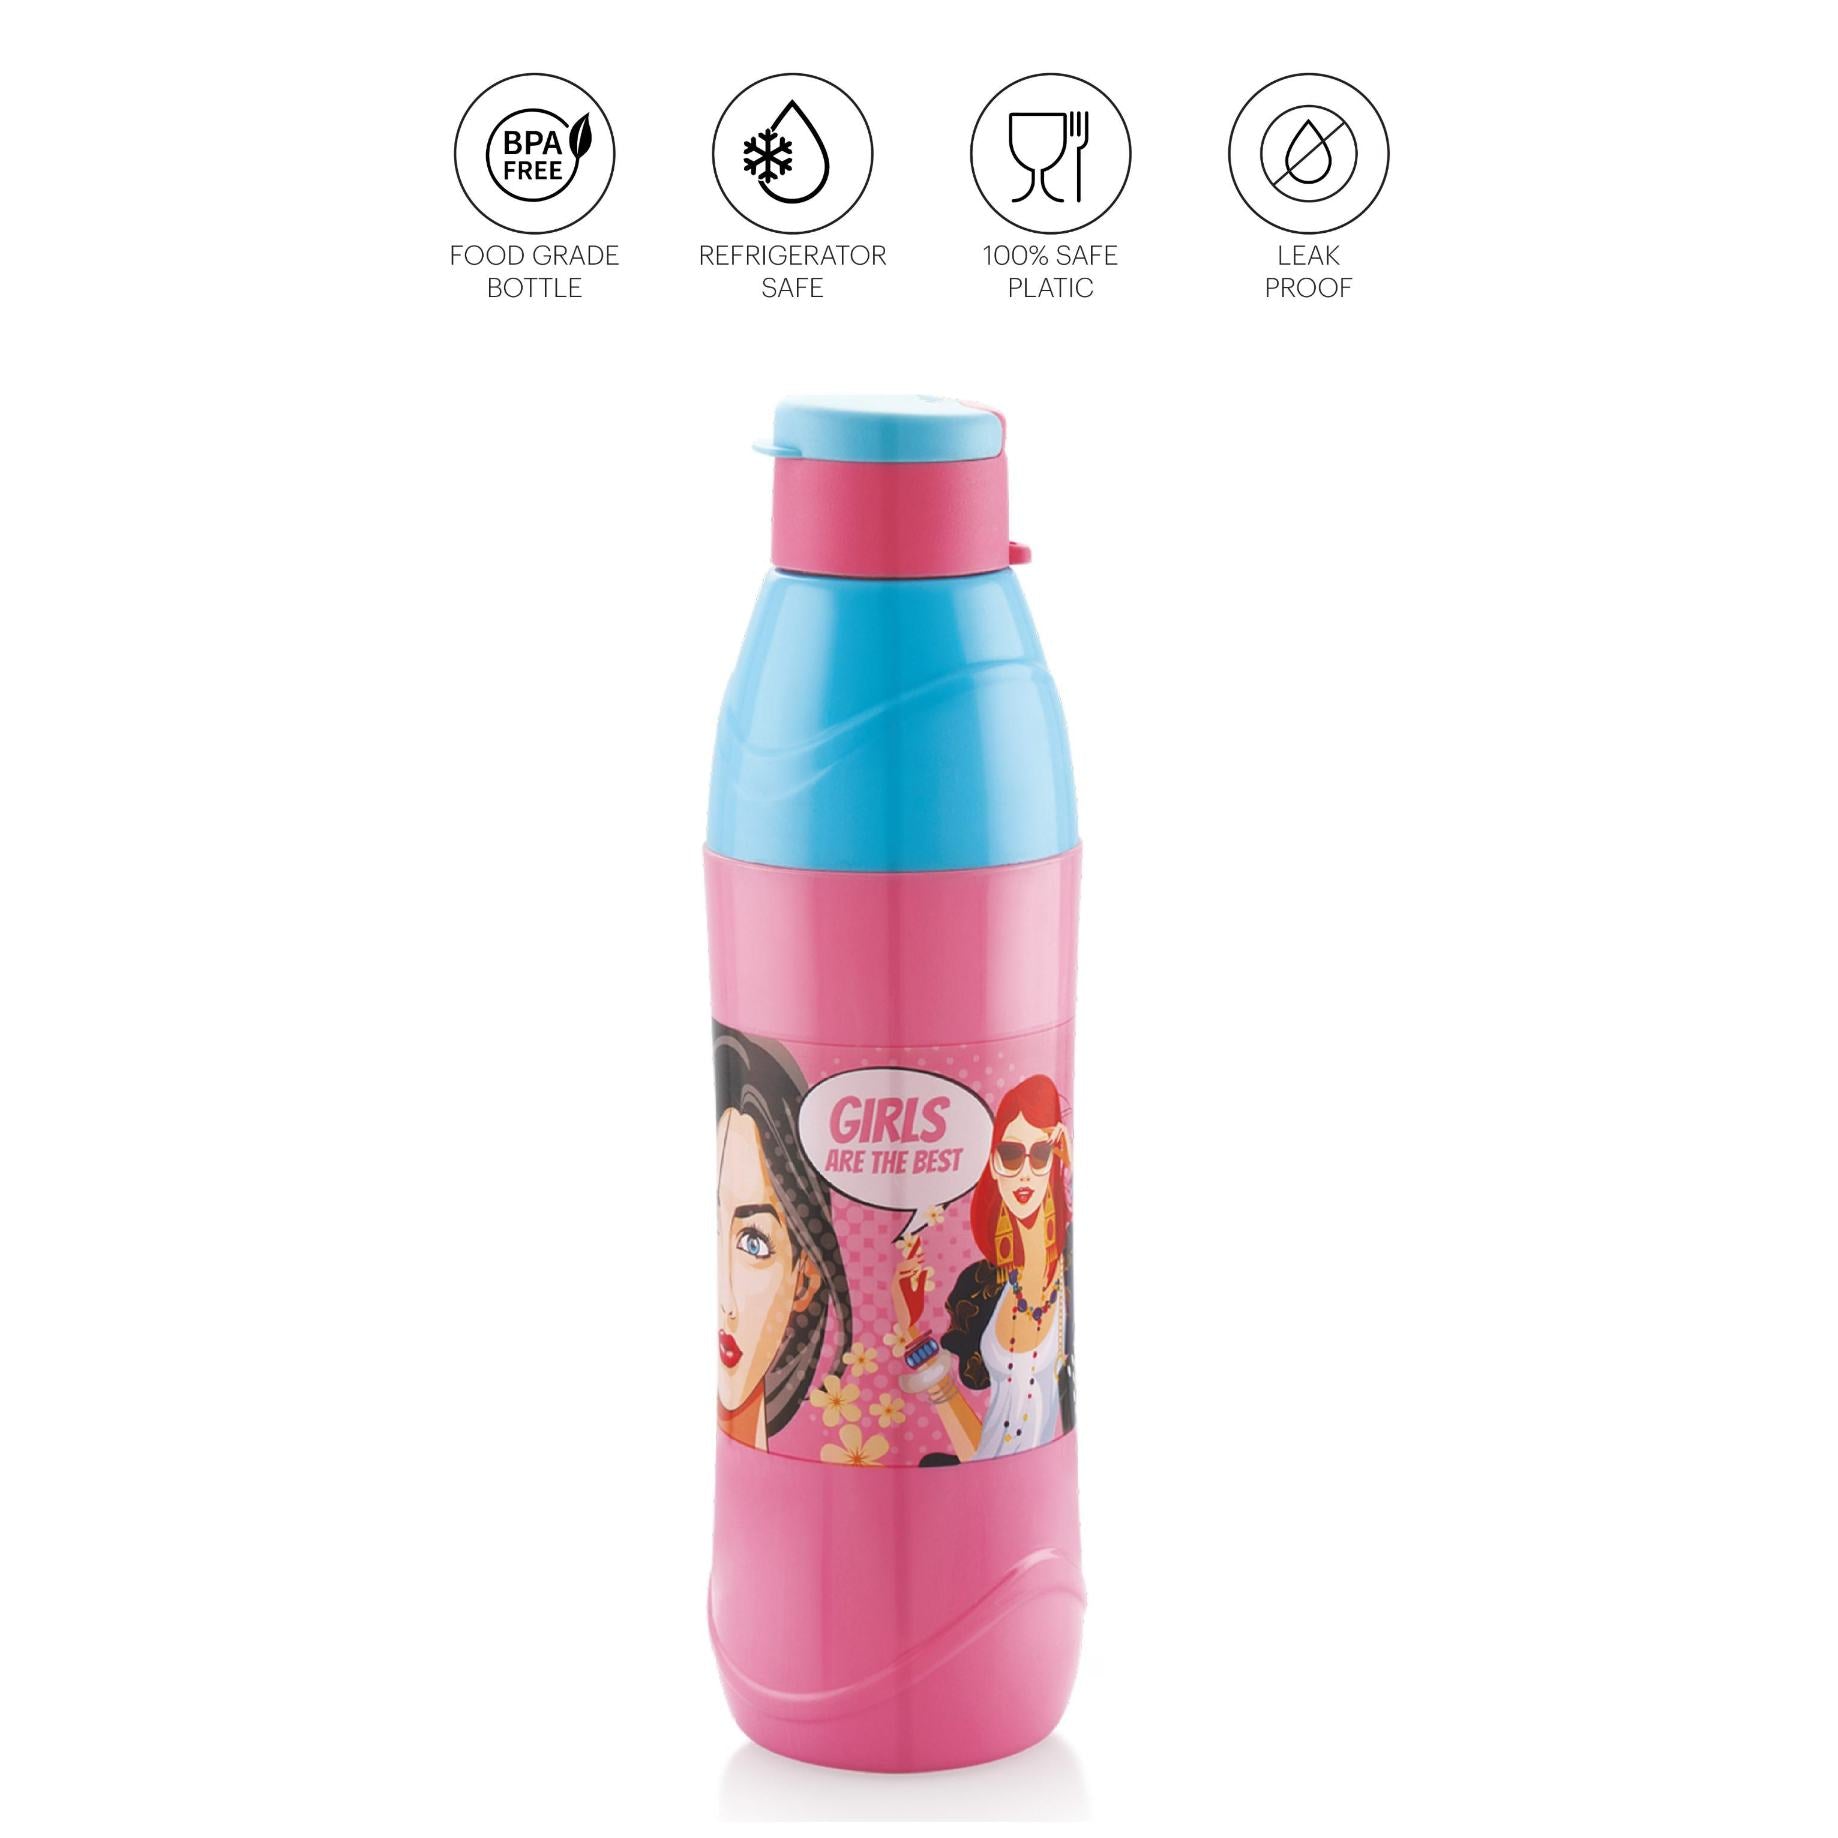 Puro Trends 900 Cold Insulated Kids Water Bottle, 690ml Pink Blue / 690ml